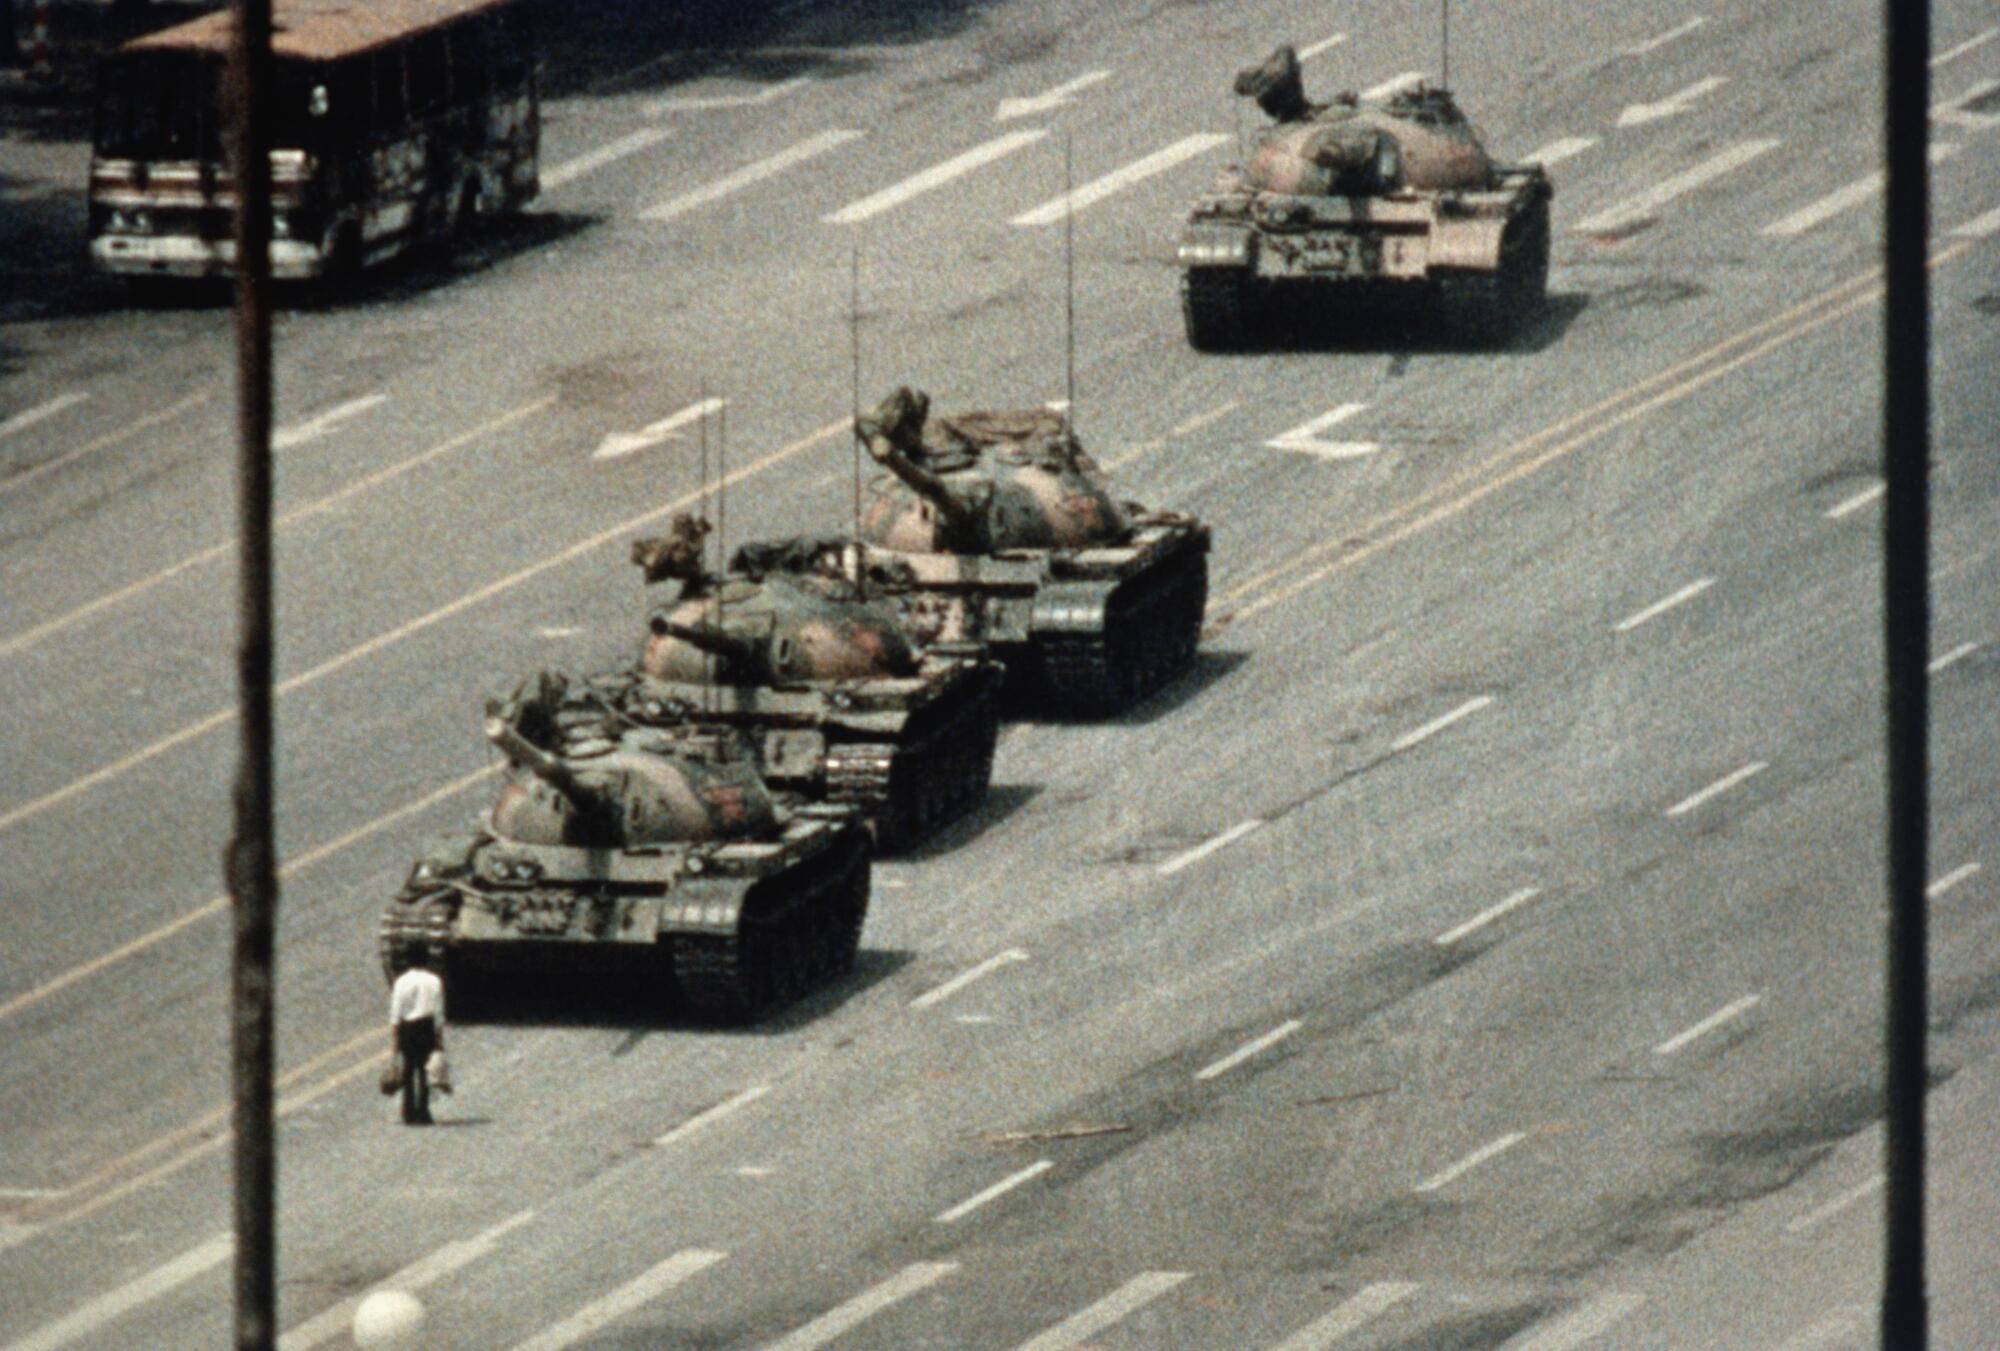 A Beijing demonstrator blocks the path of a tank convoy along the Avenue of Eternal Peace near Tiananmen Square